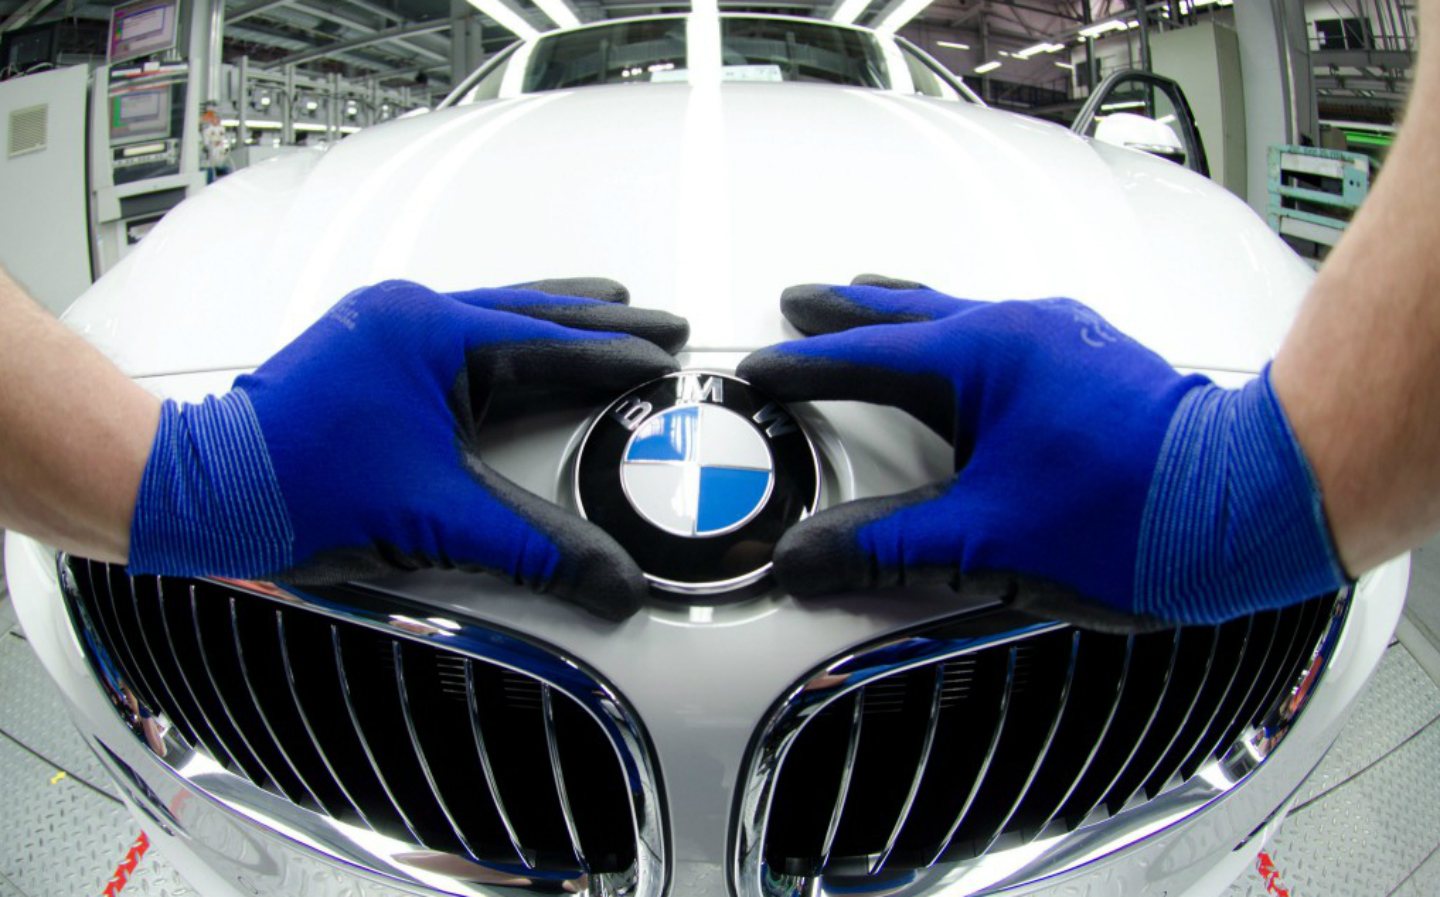 BMW failed to act over electrical 'blackout' that risked the lives of its customers